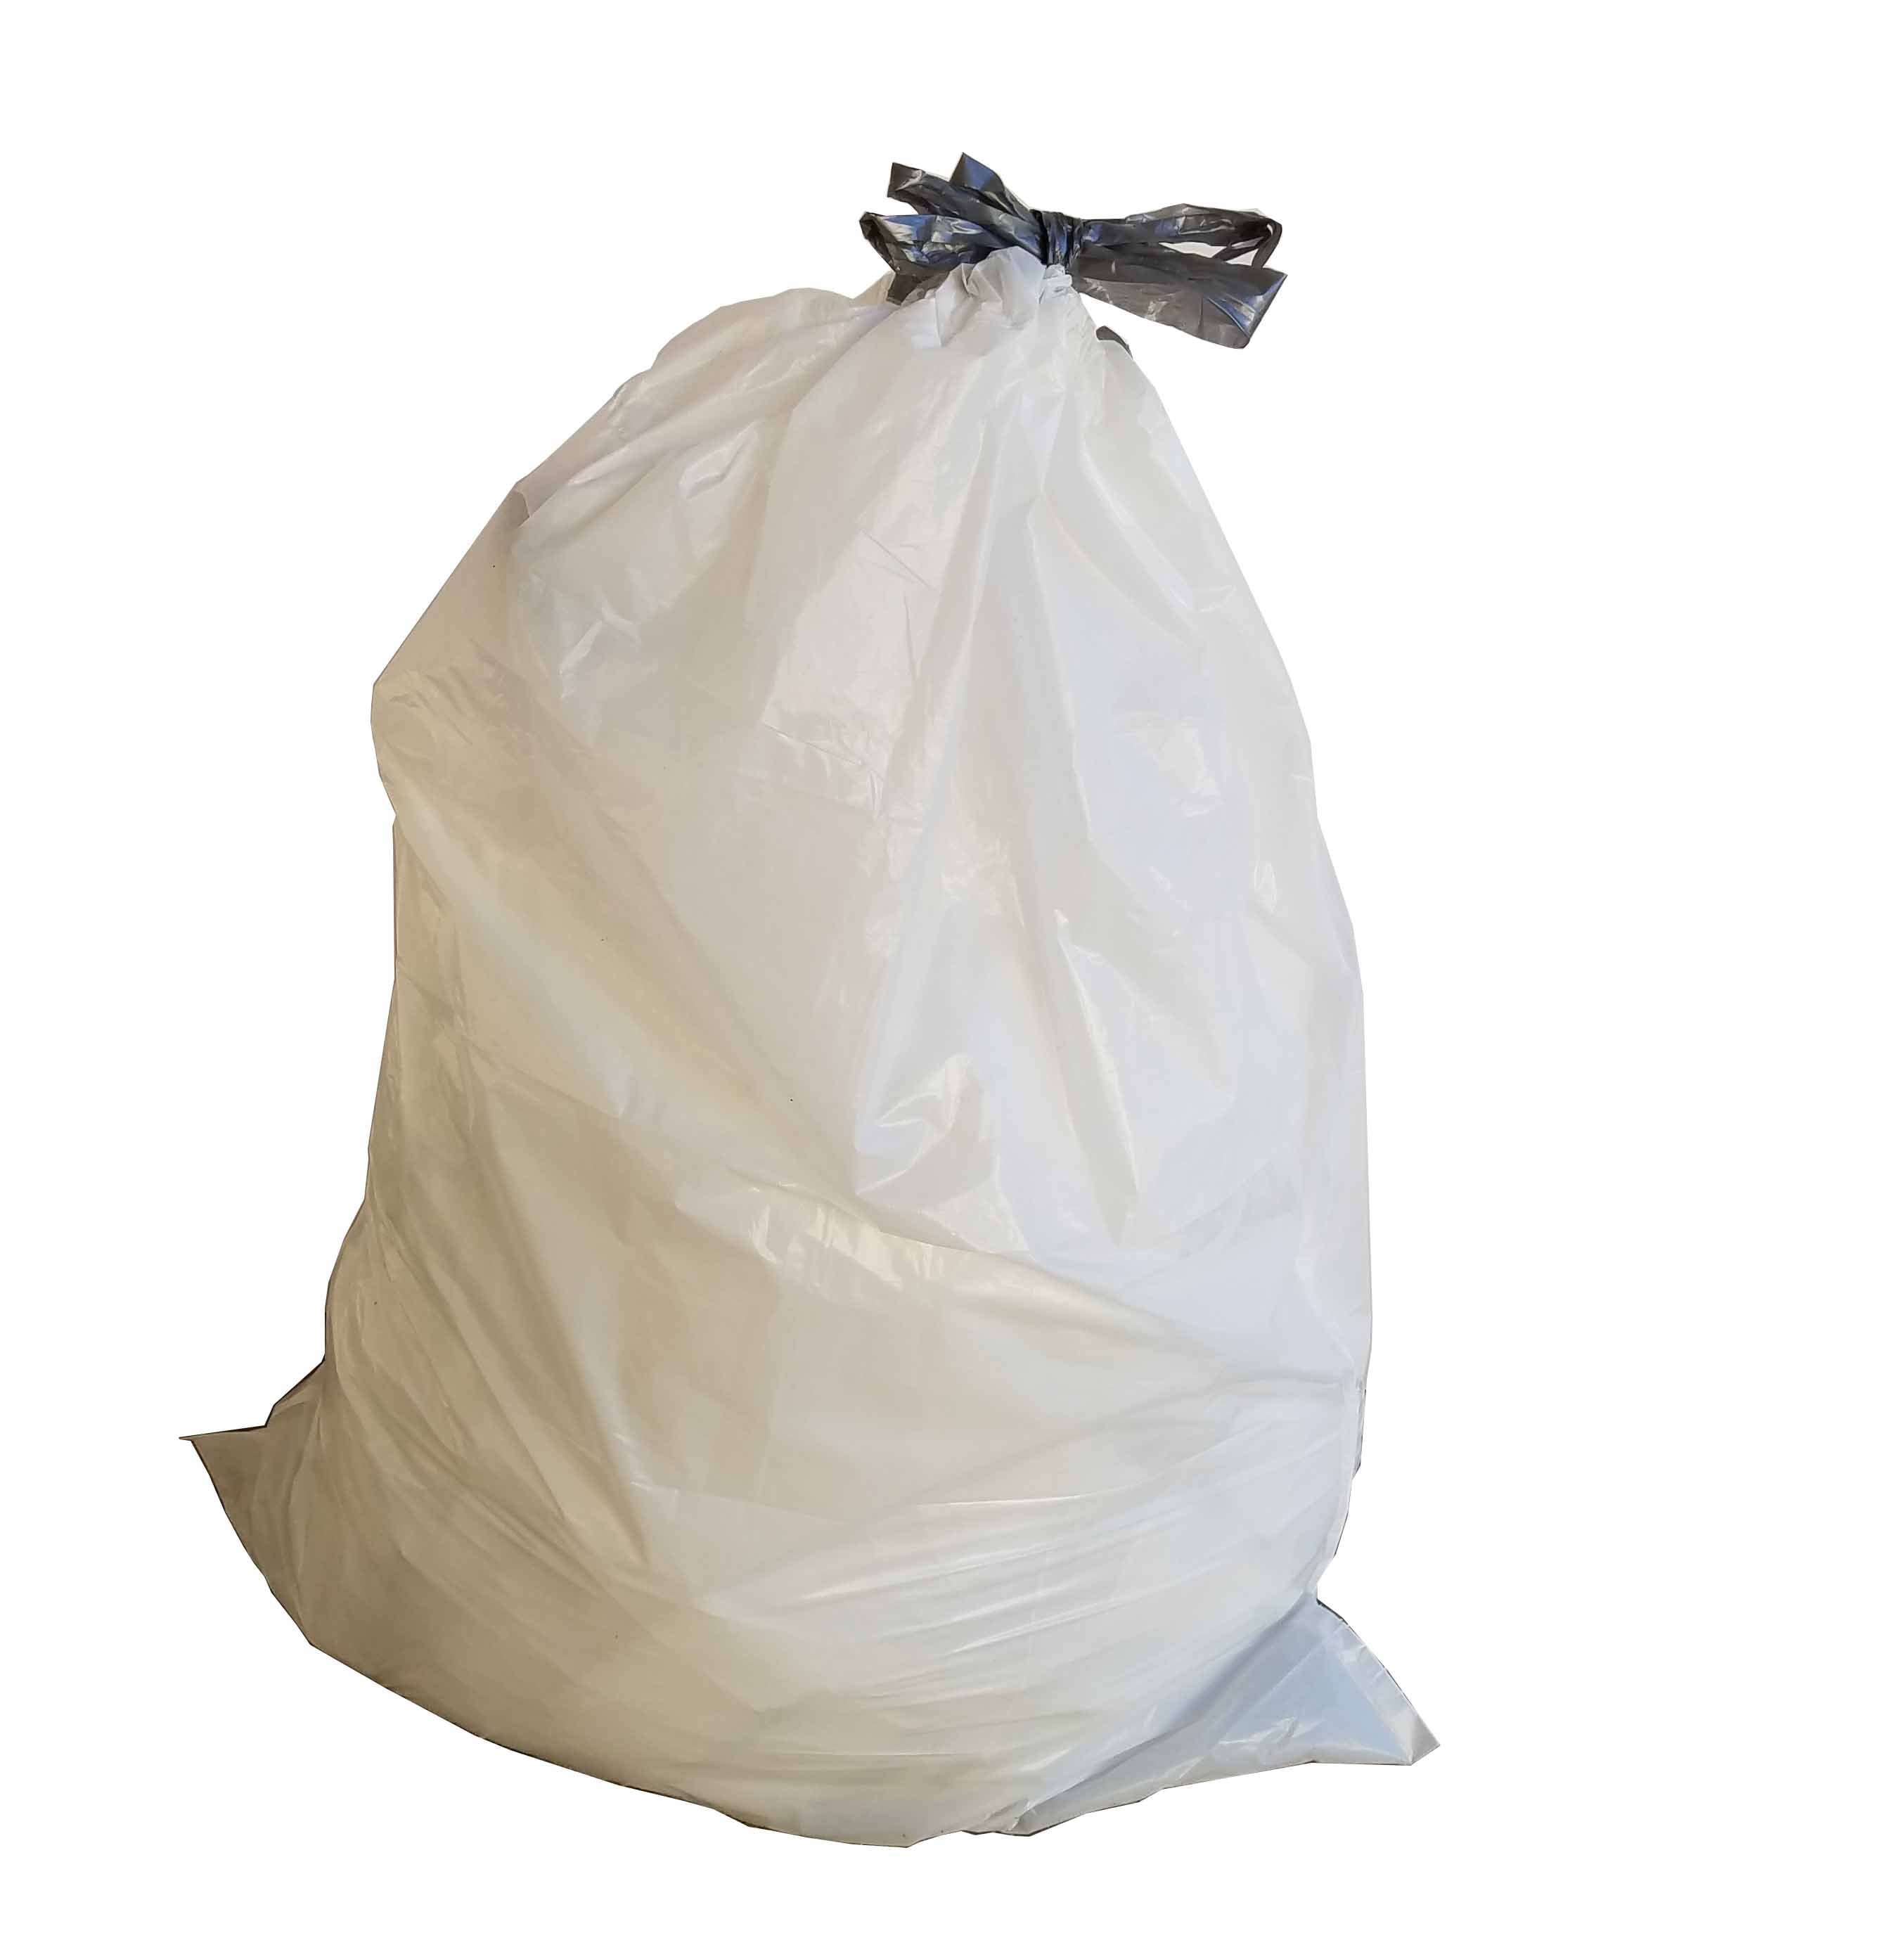 PlasticMill 4-Gallons White Outdoor Plastic Can Trash Bag (100